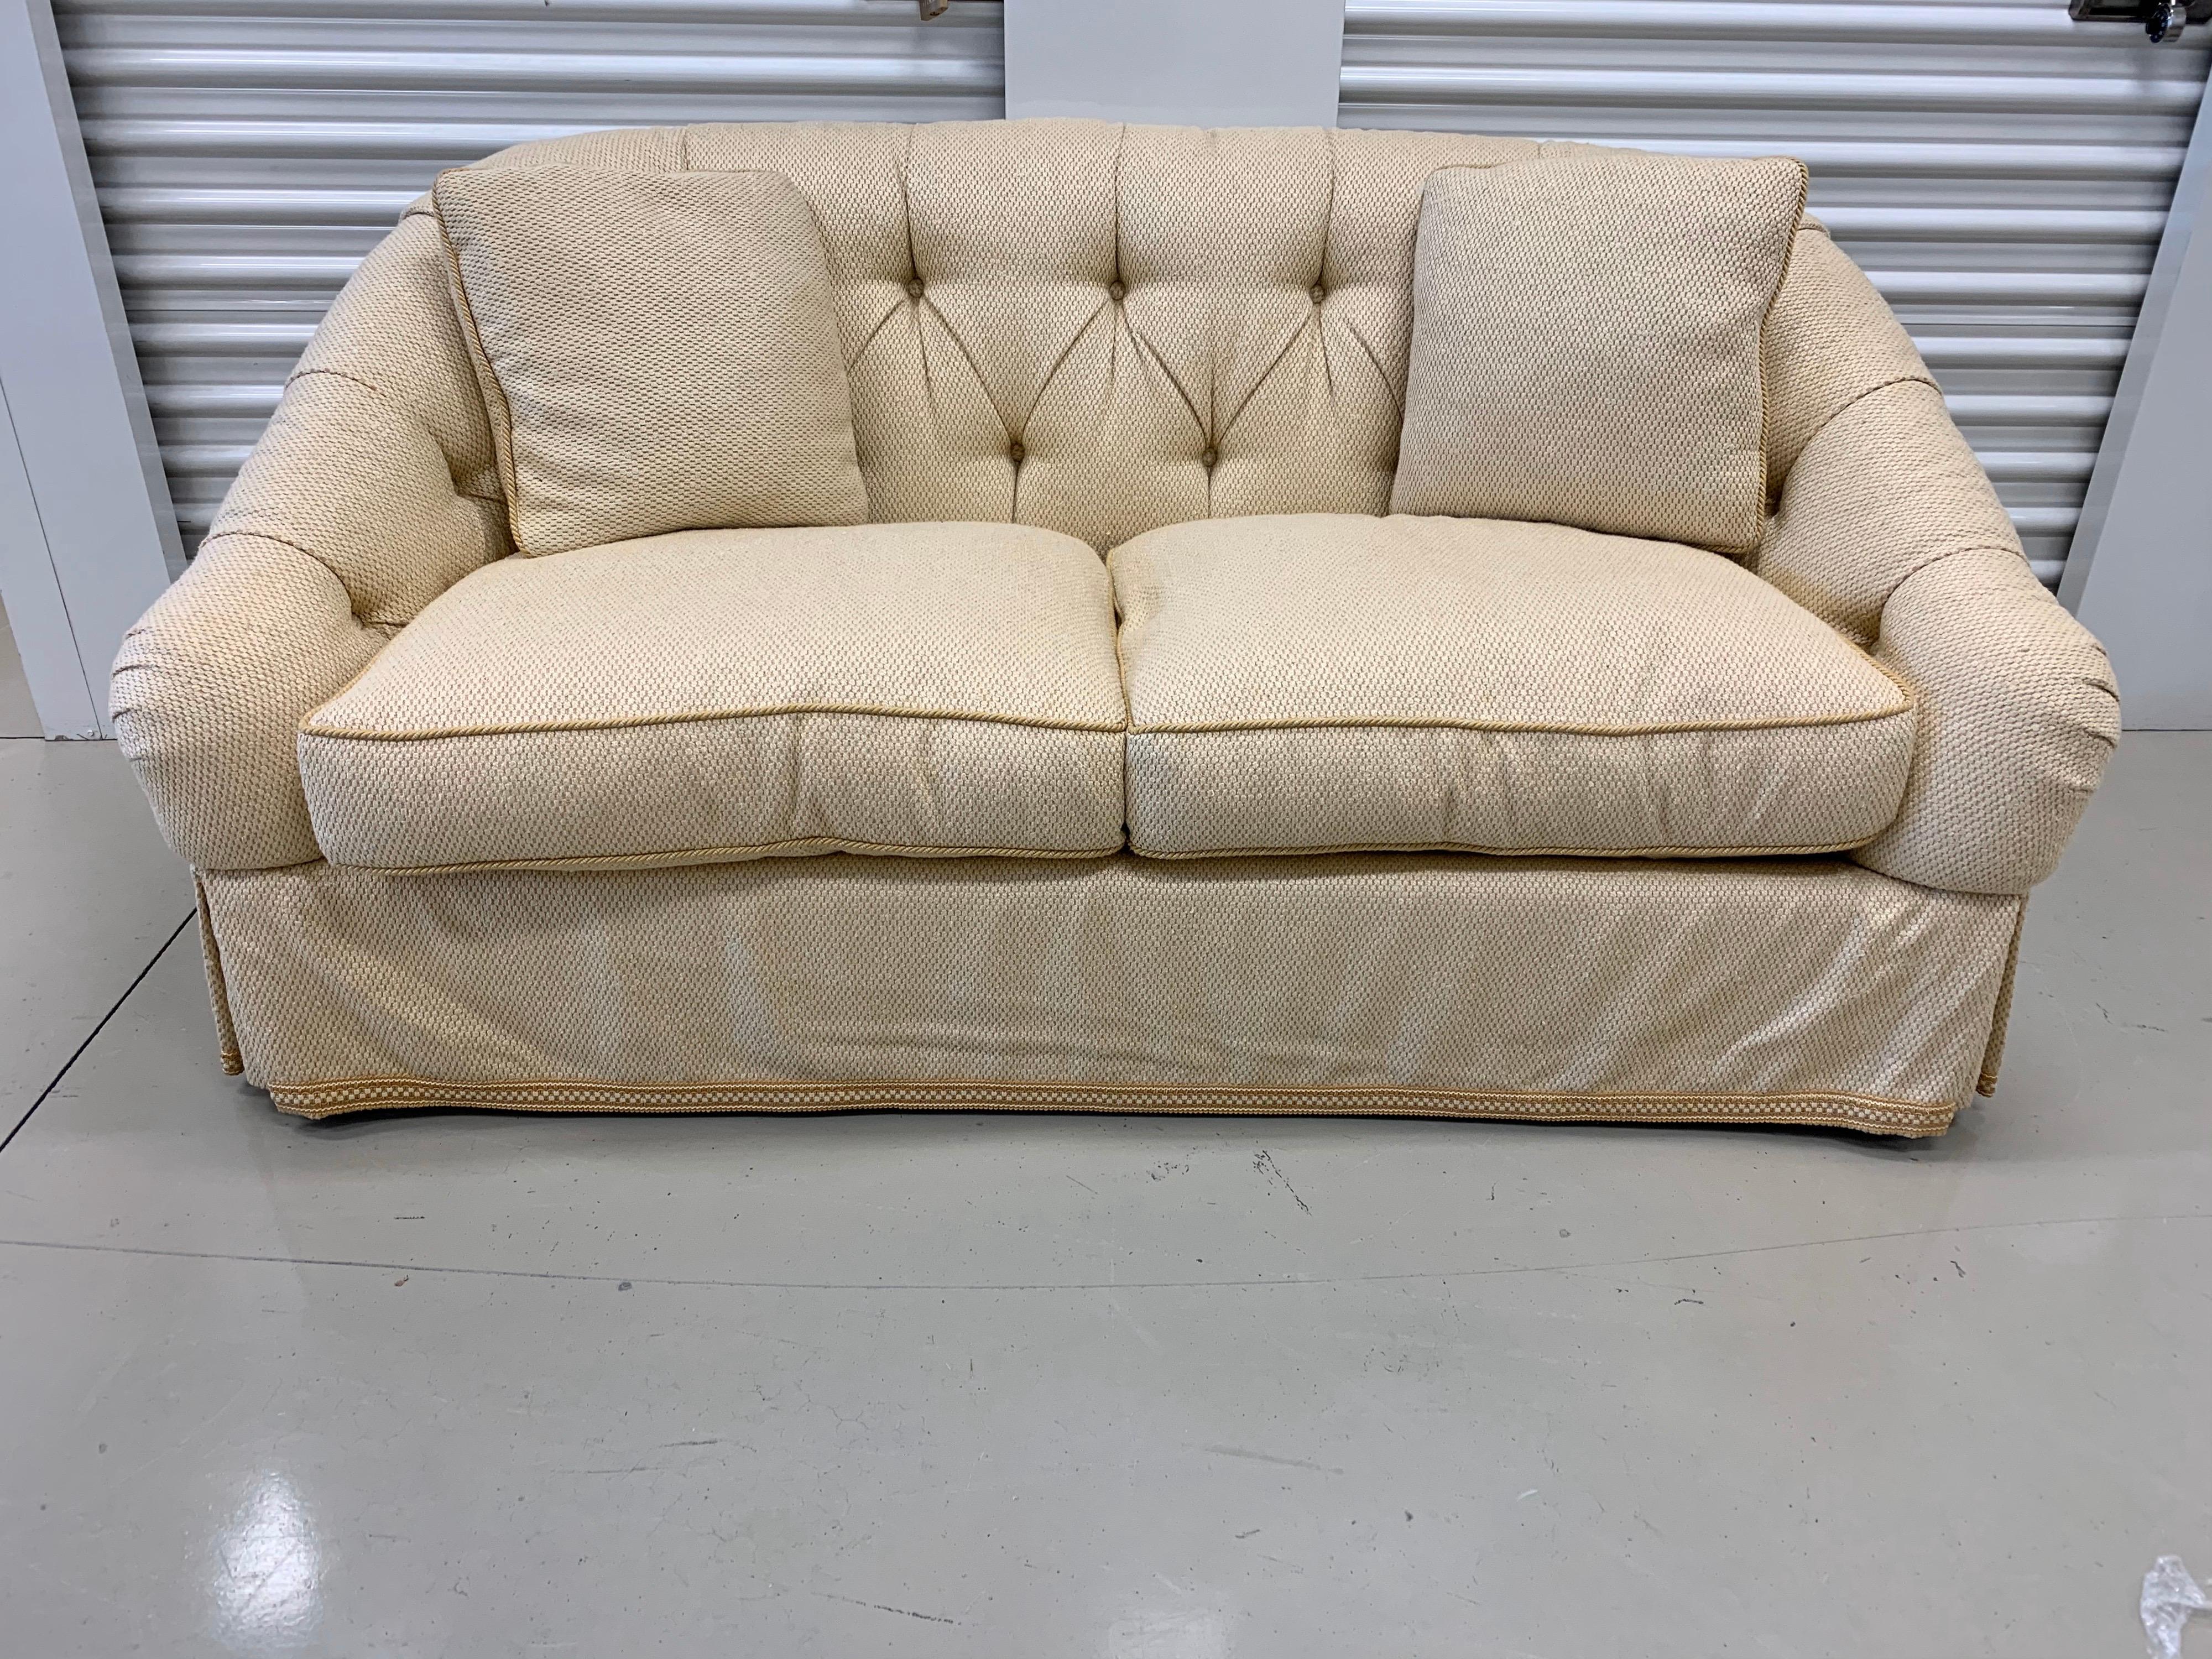 Elegant beige upholstered loveseat by US furniture maker Baker Furniture. Great tufted look and a color that will remain neutral in any home.